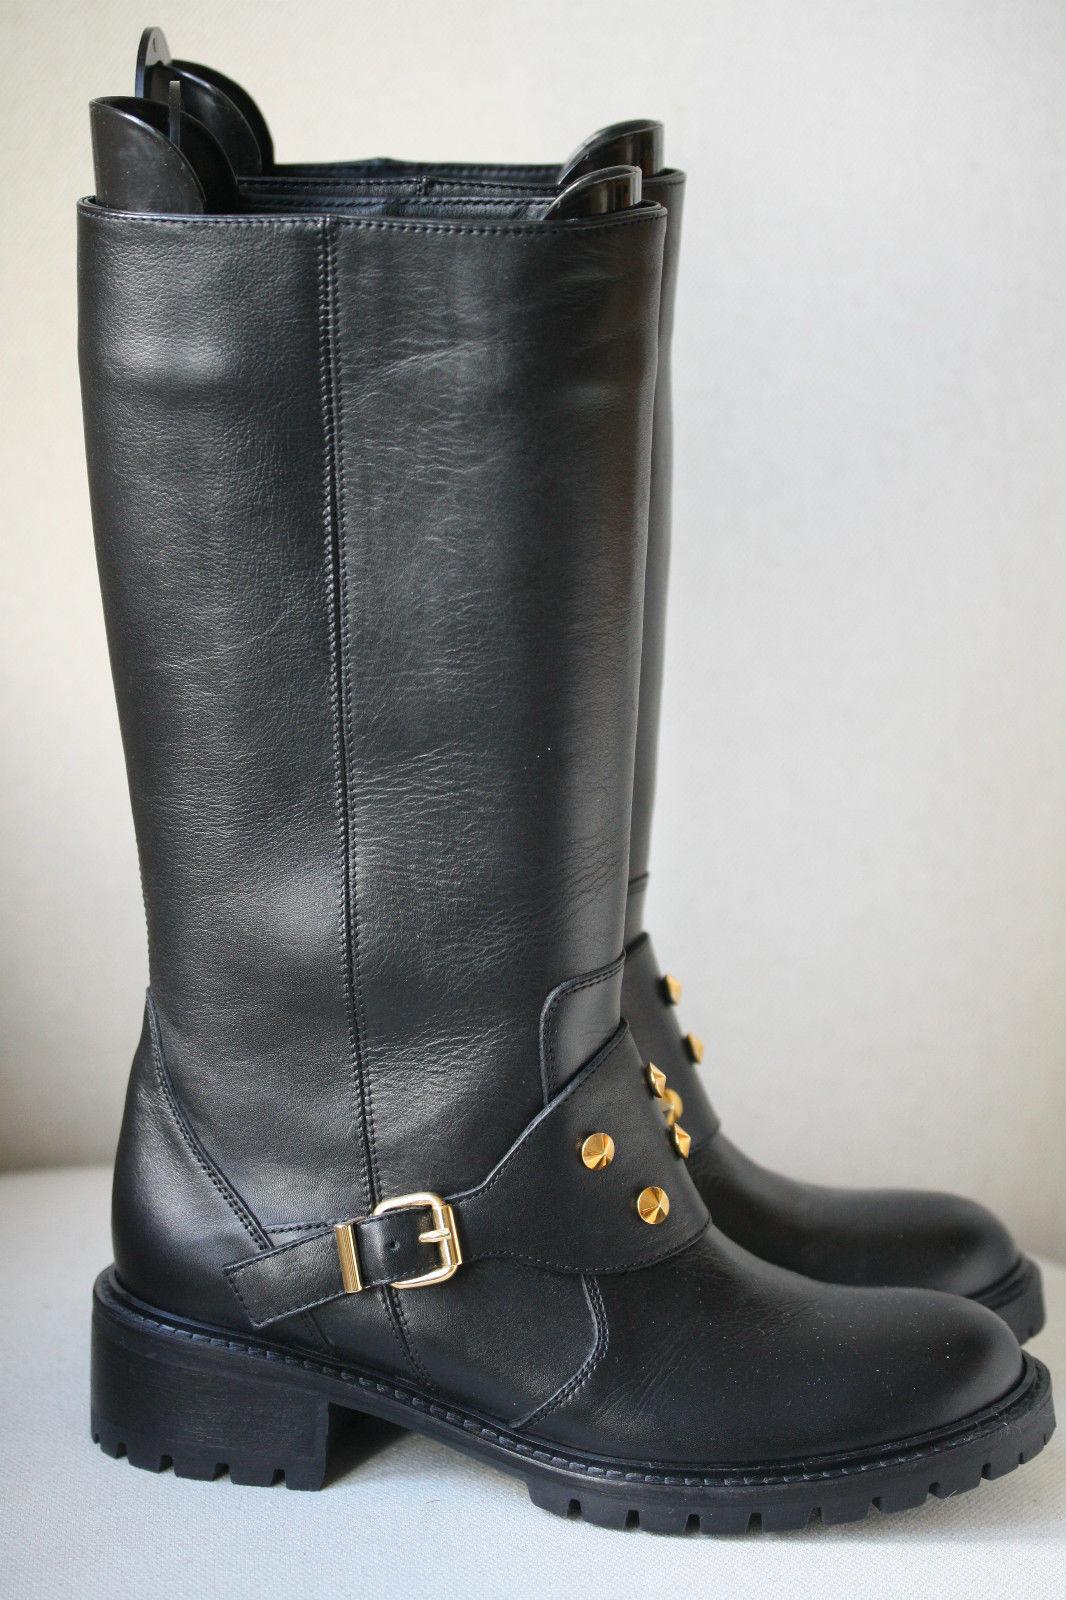 Black leather biker boots with gold hardware with a heel that measures approximately 40mm/ 1.5 inches. Fendi boots have studs at the front, a round toe, a buckle at the side and simply pull on.

Size: EU 37 (UK 4, US 7)

Condition: New without box. 